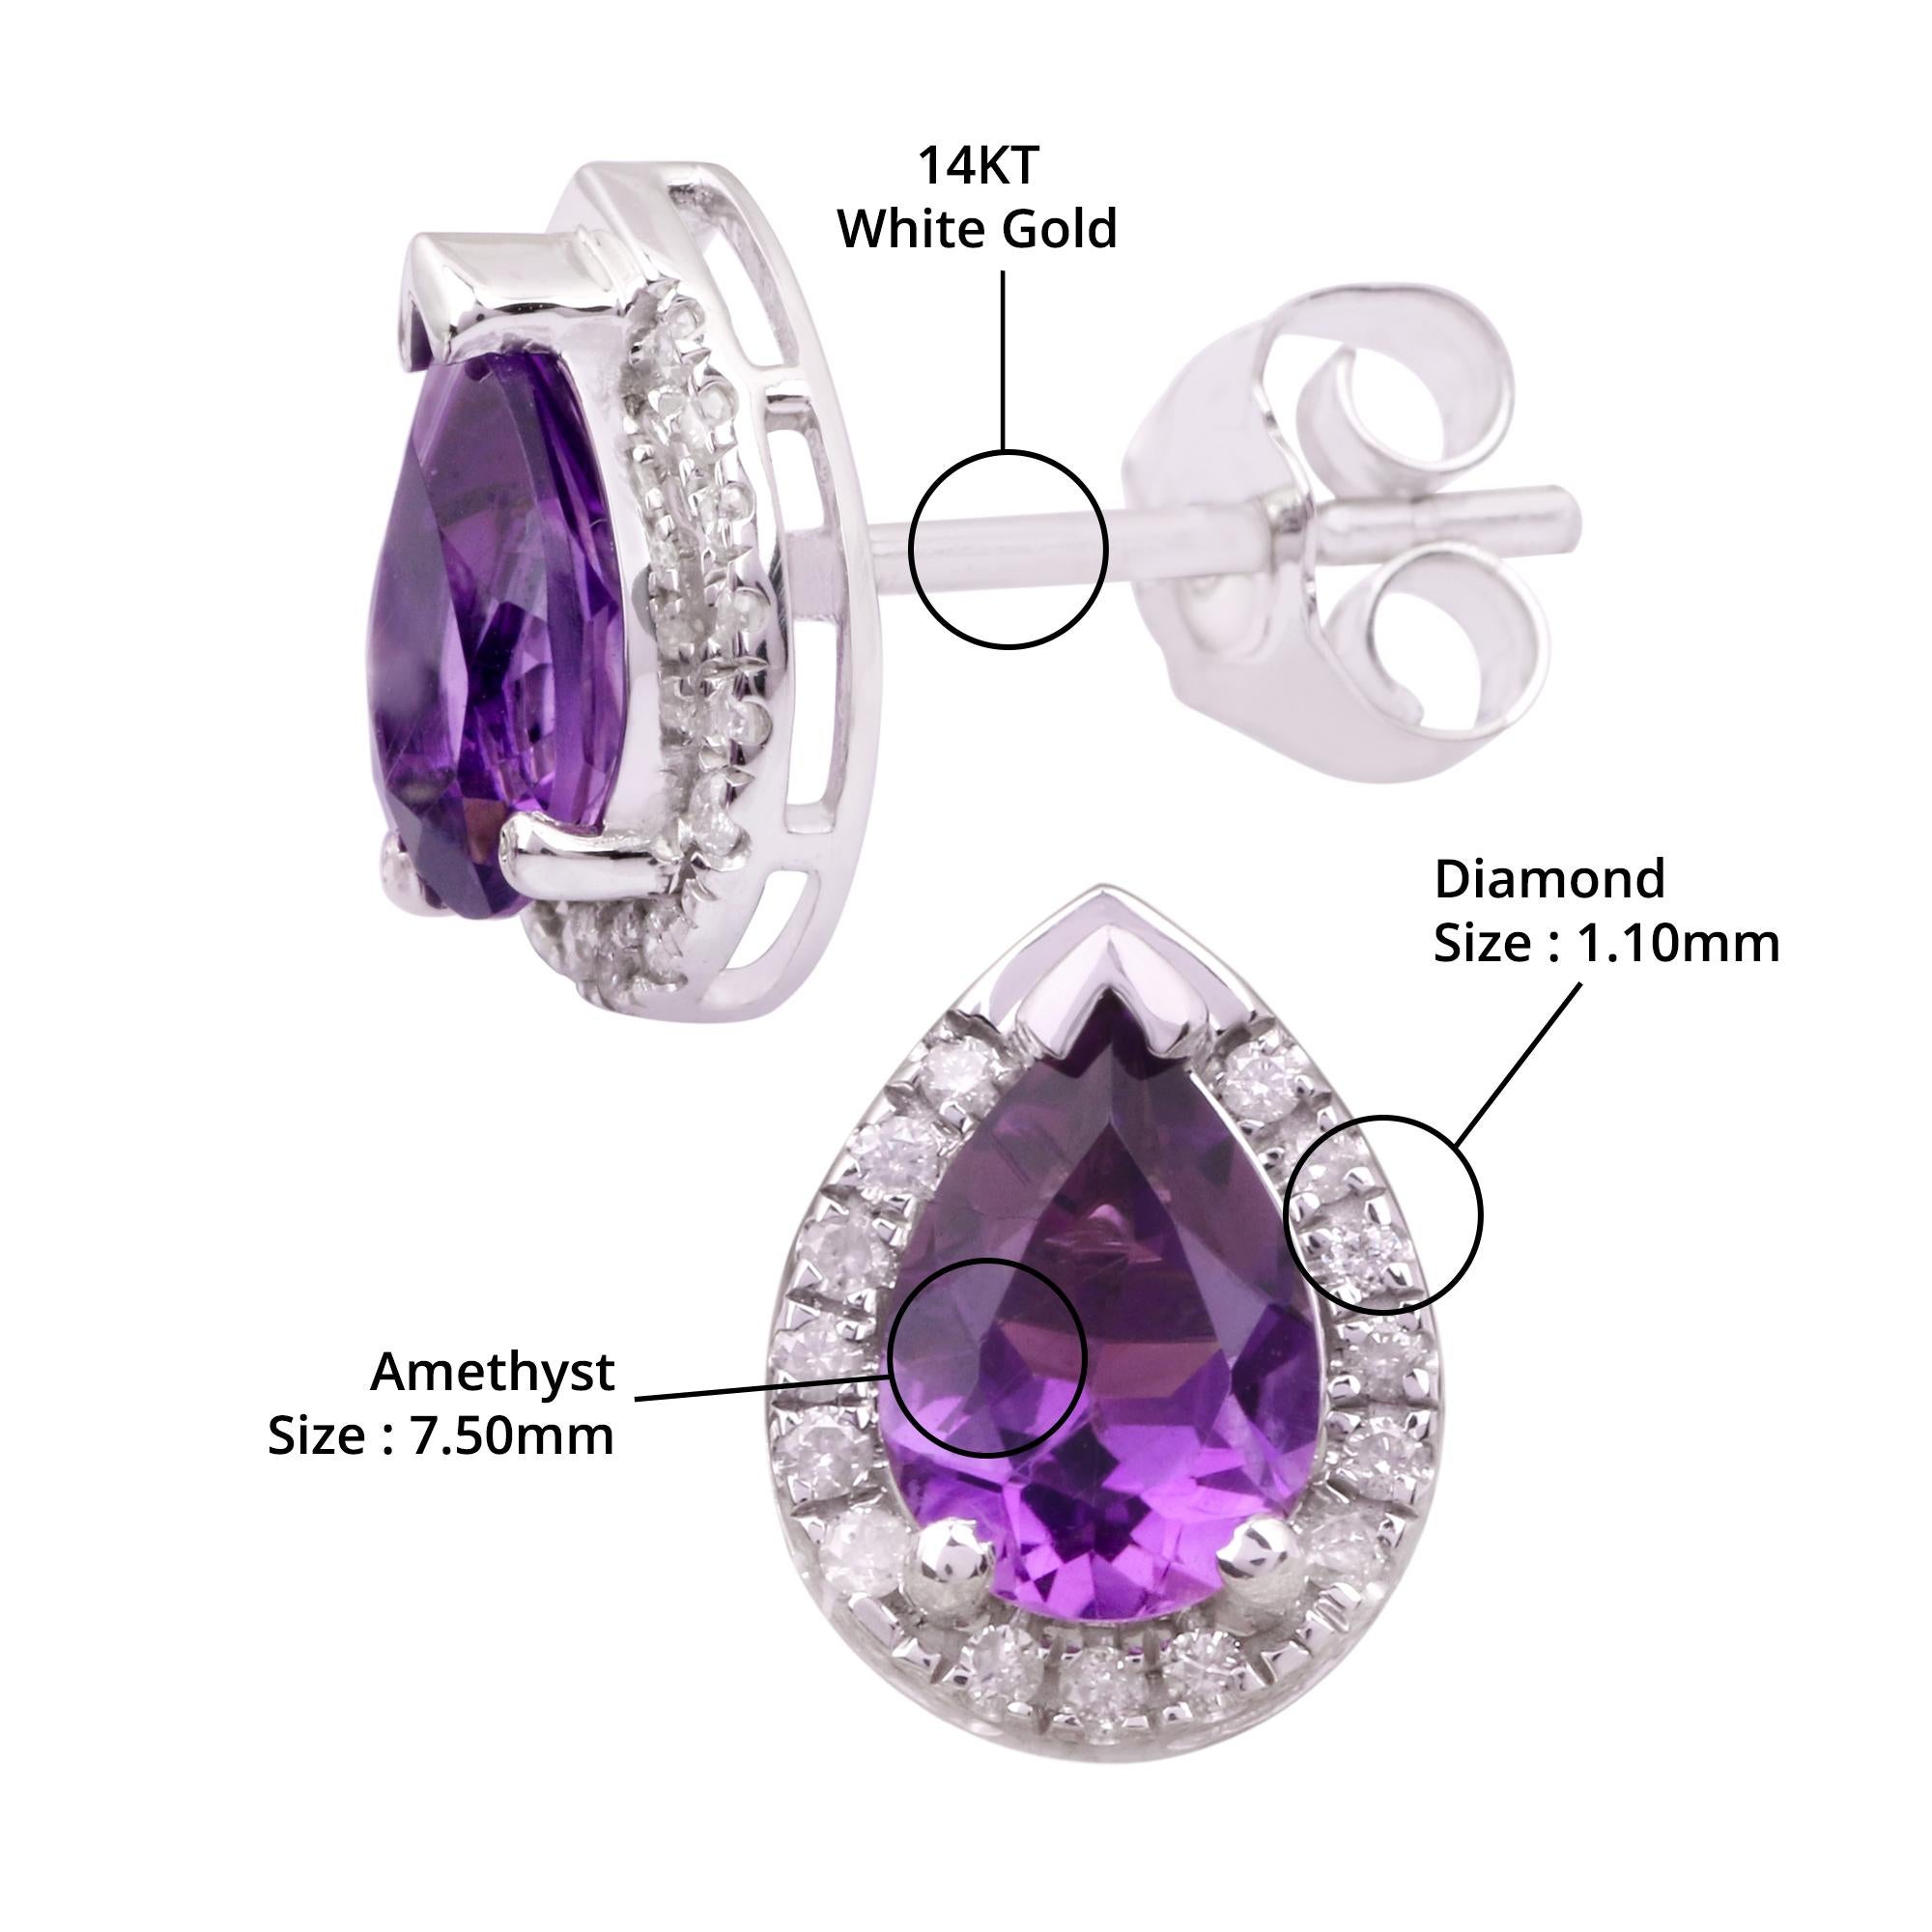 Our gorgeous diamond Earrings are finely set into the most astonishing designs ranging from modern-era jewels to fascinating classics, and they will certainly rekindle the romance between you and your spouse. Our Diamond Earrings are a regal